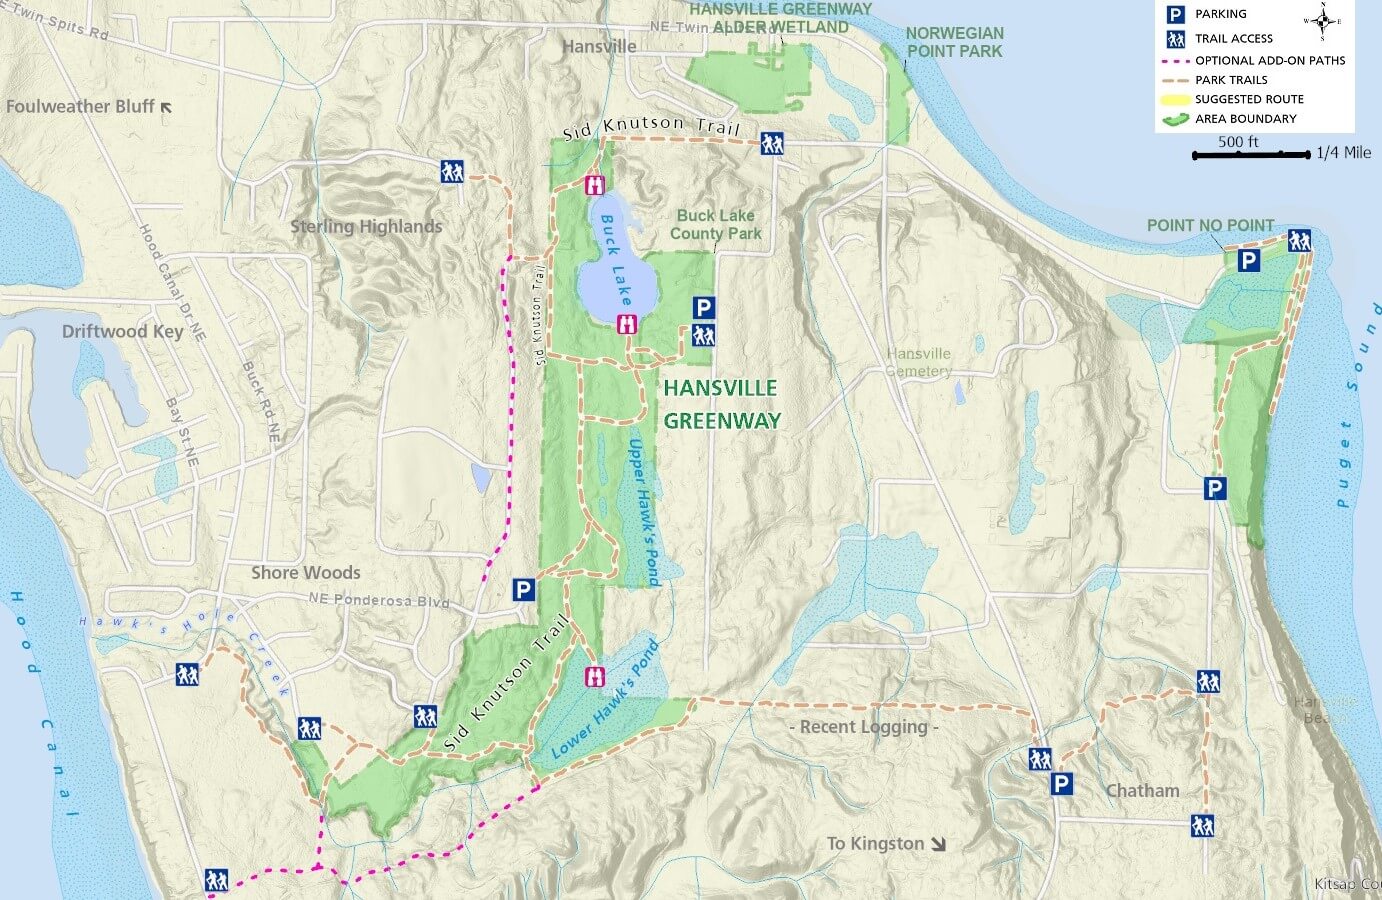 Hansville Greenway Trail Map - Overview